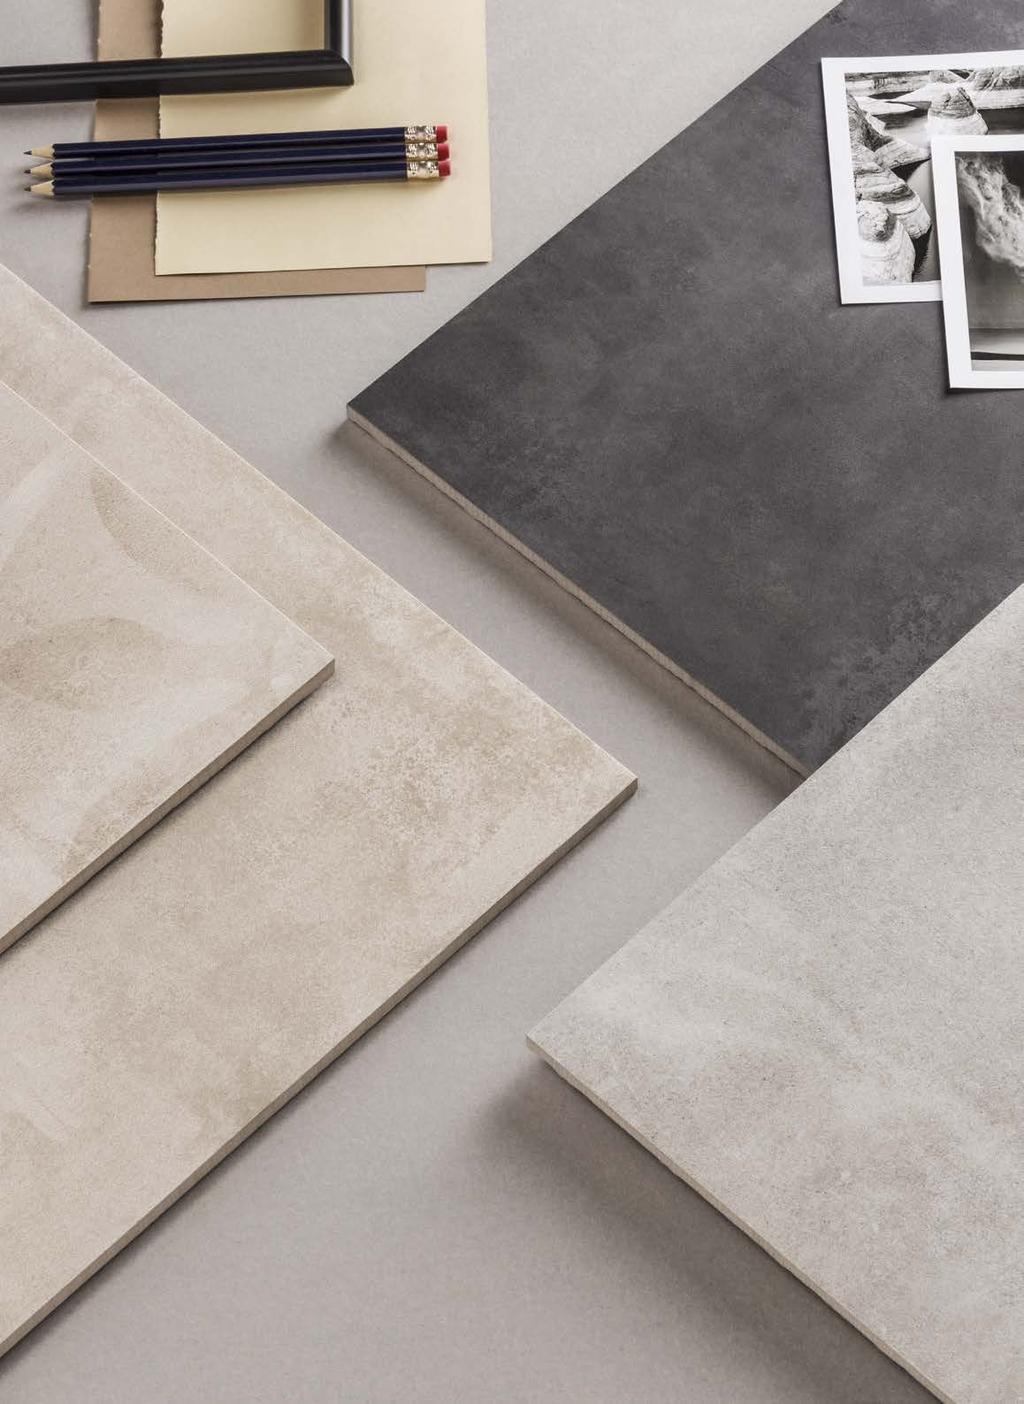 Italian quality ceramic tiles tailor-made for the American lifestyle